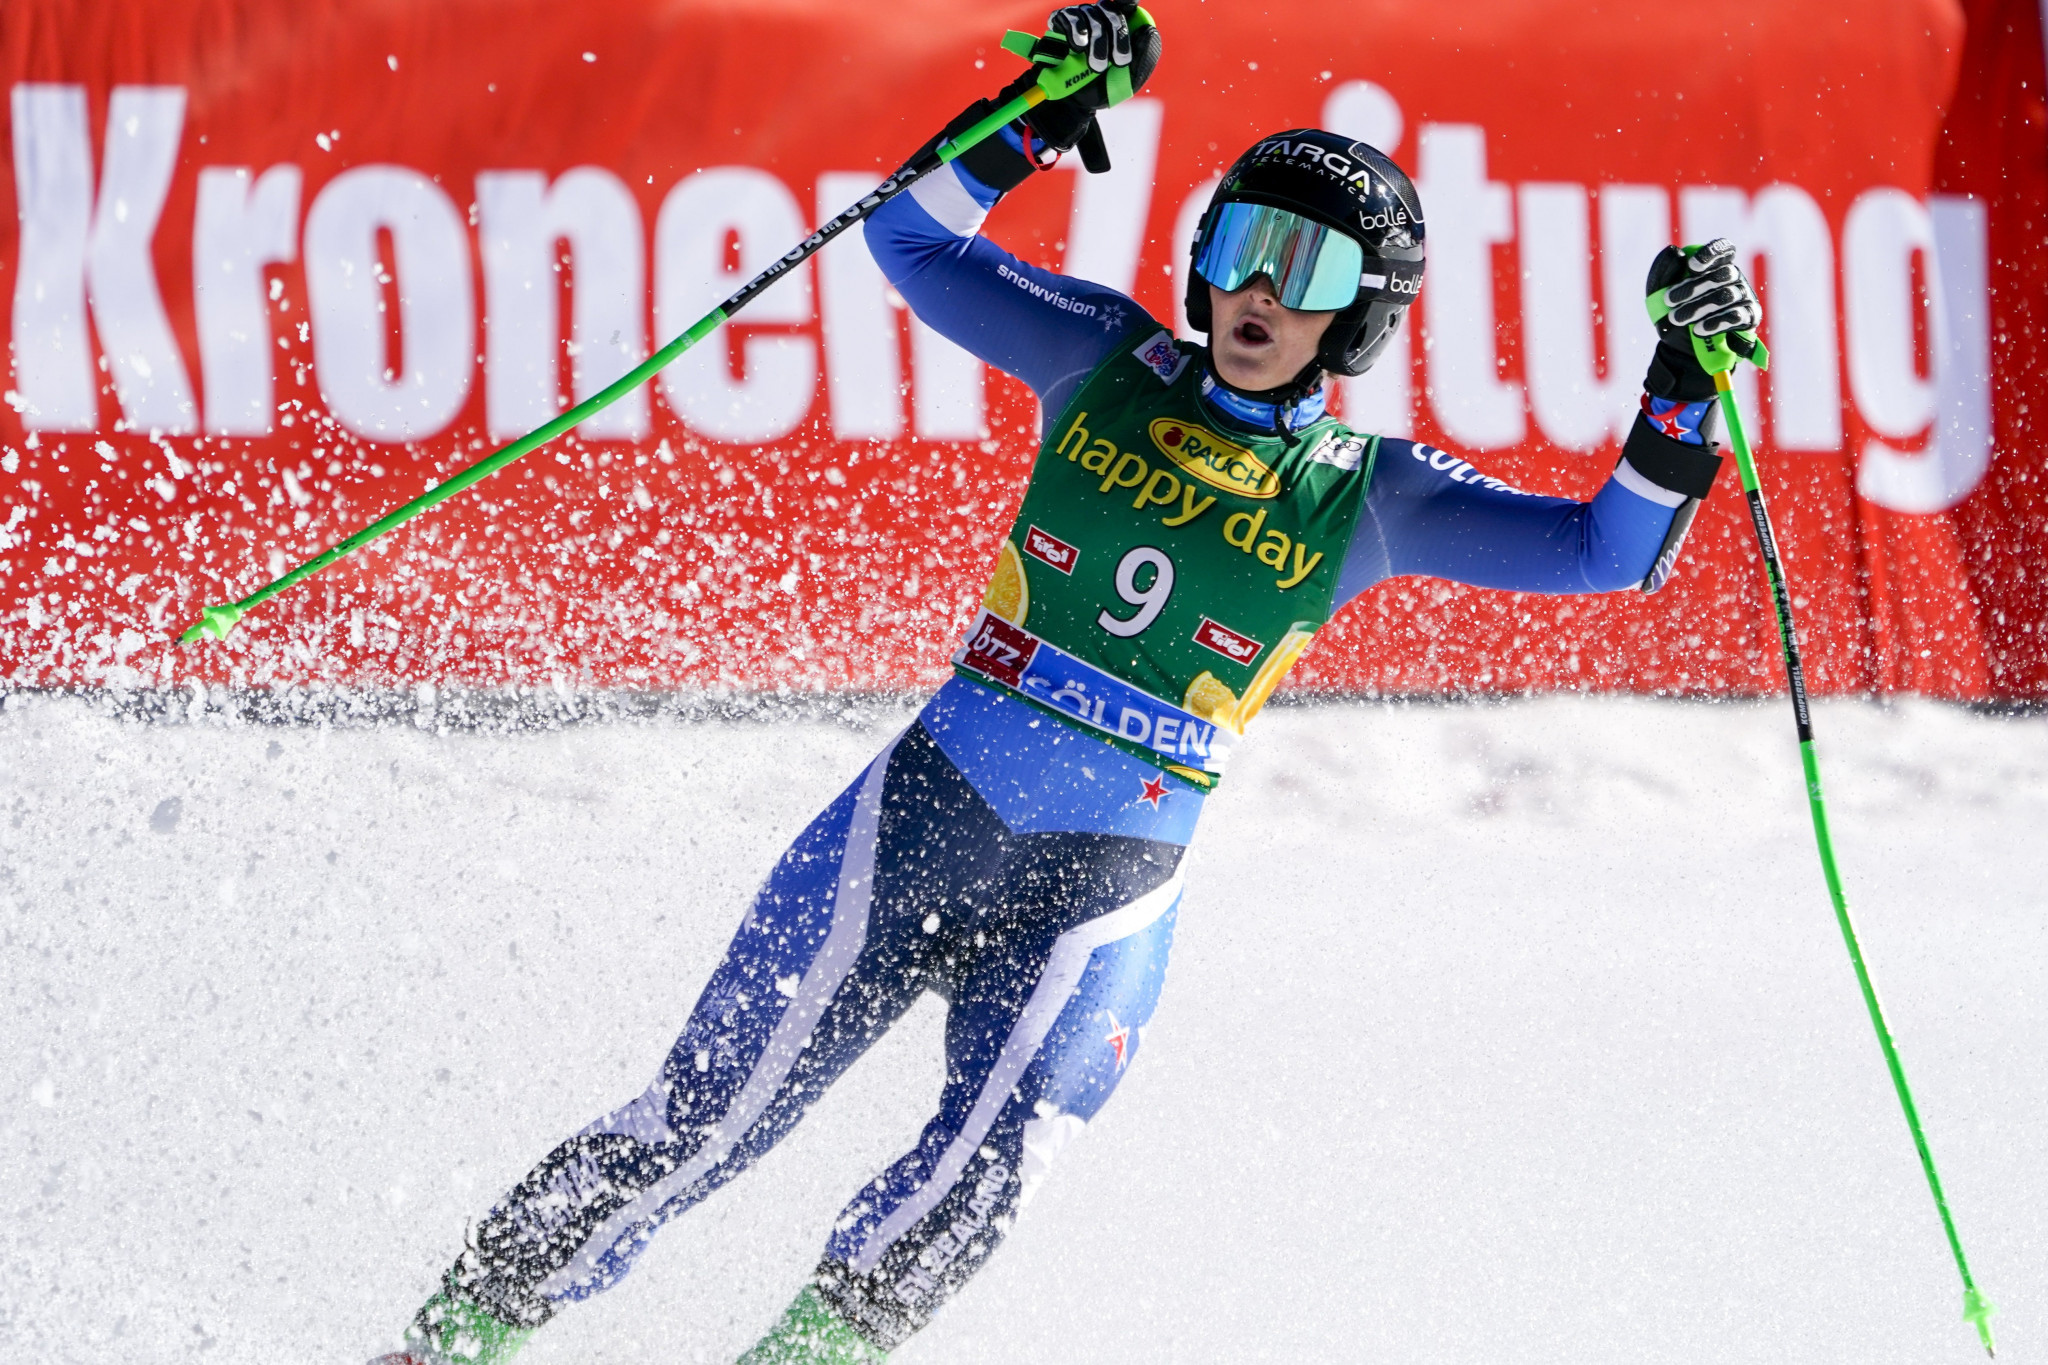 Robinson stuns Shiffrin to secure first FIS Alpine Skiing World Cup win